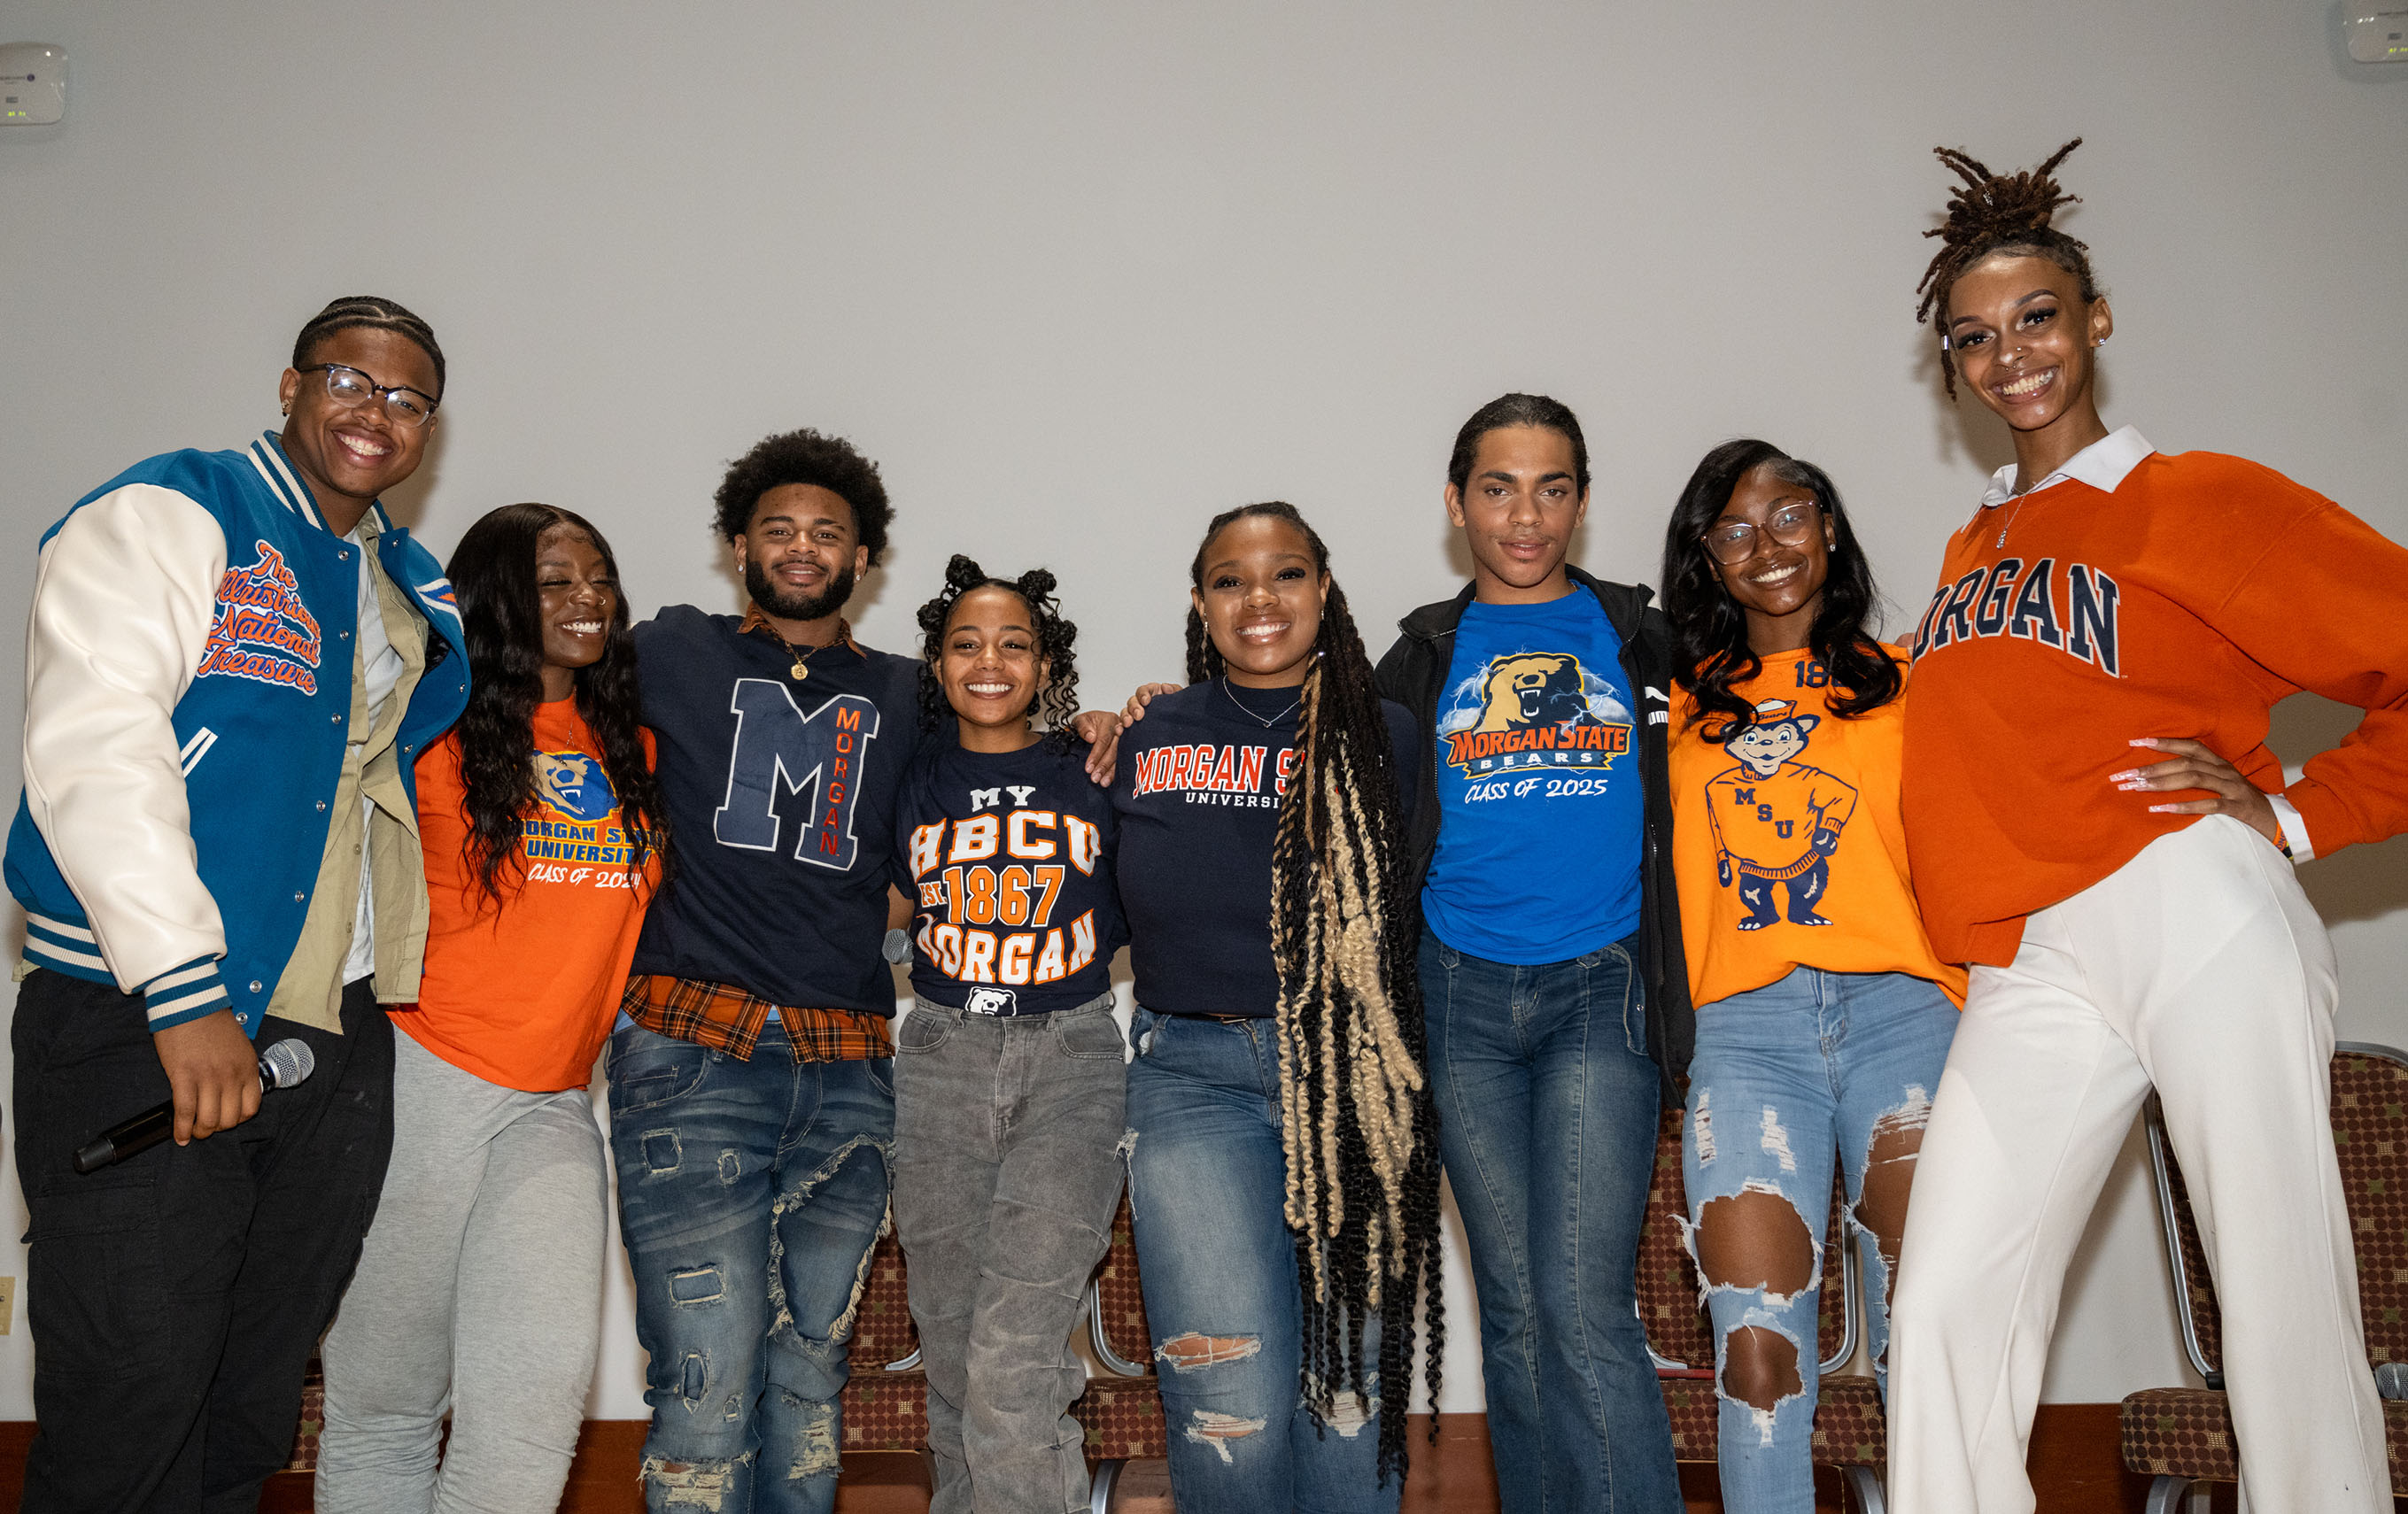 Morgan State cast members of The College Tour